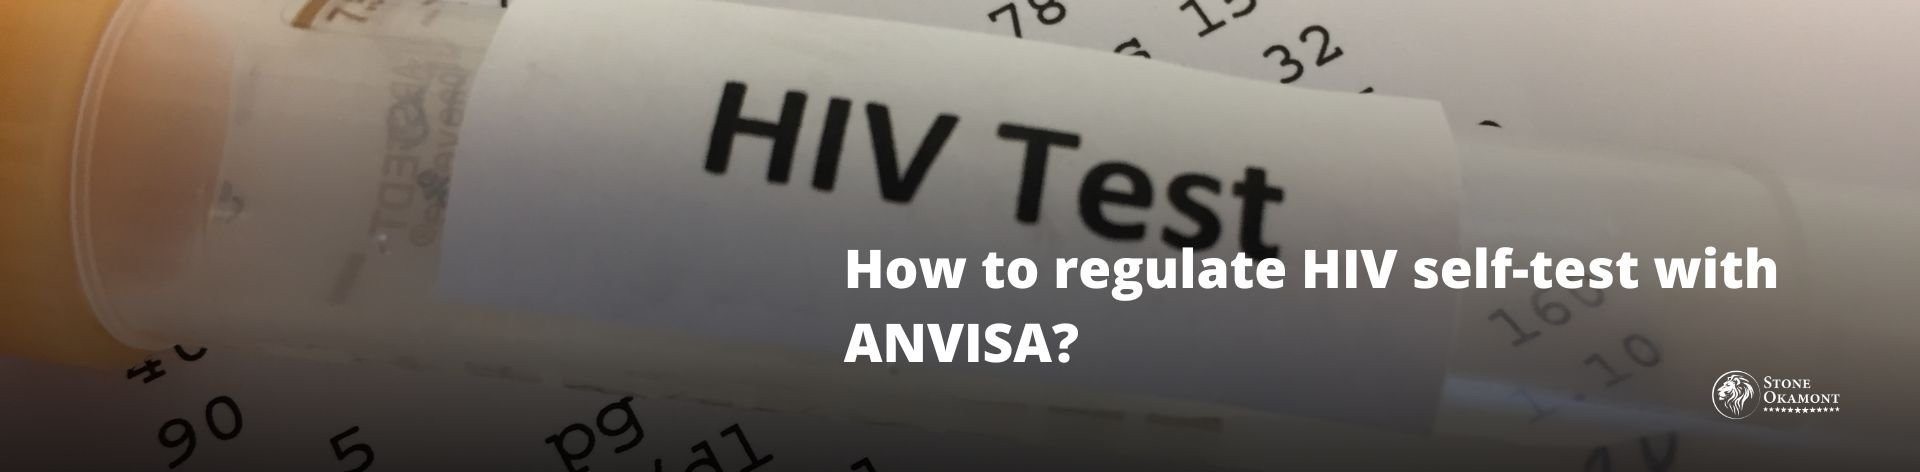 How to regulate HIV self-test with ANVISA?